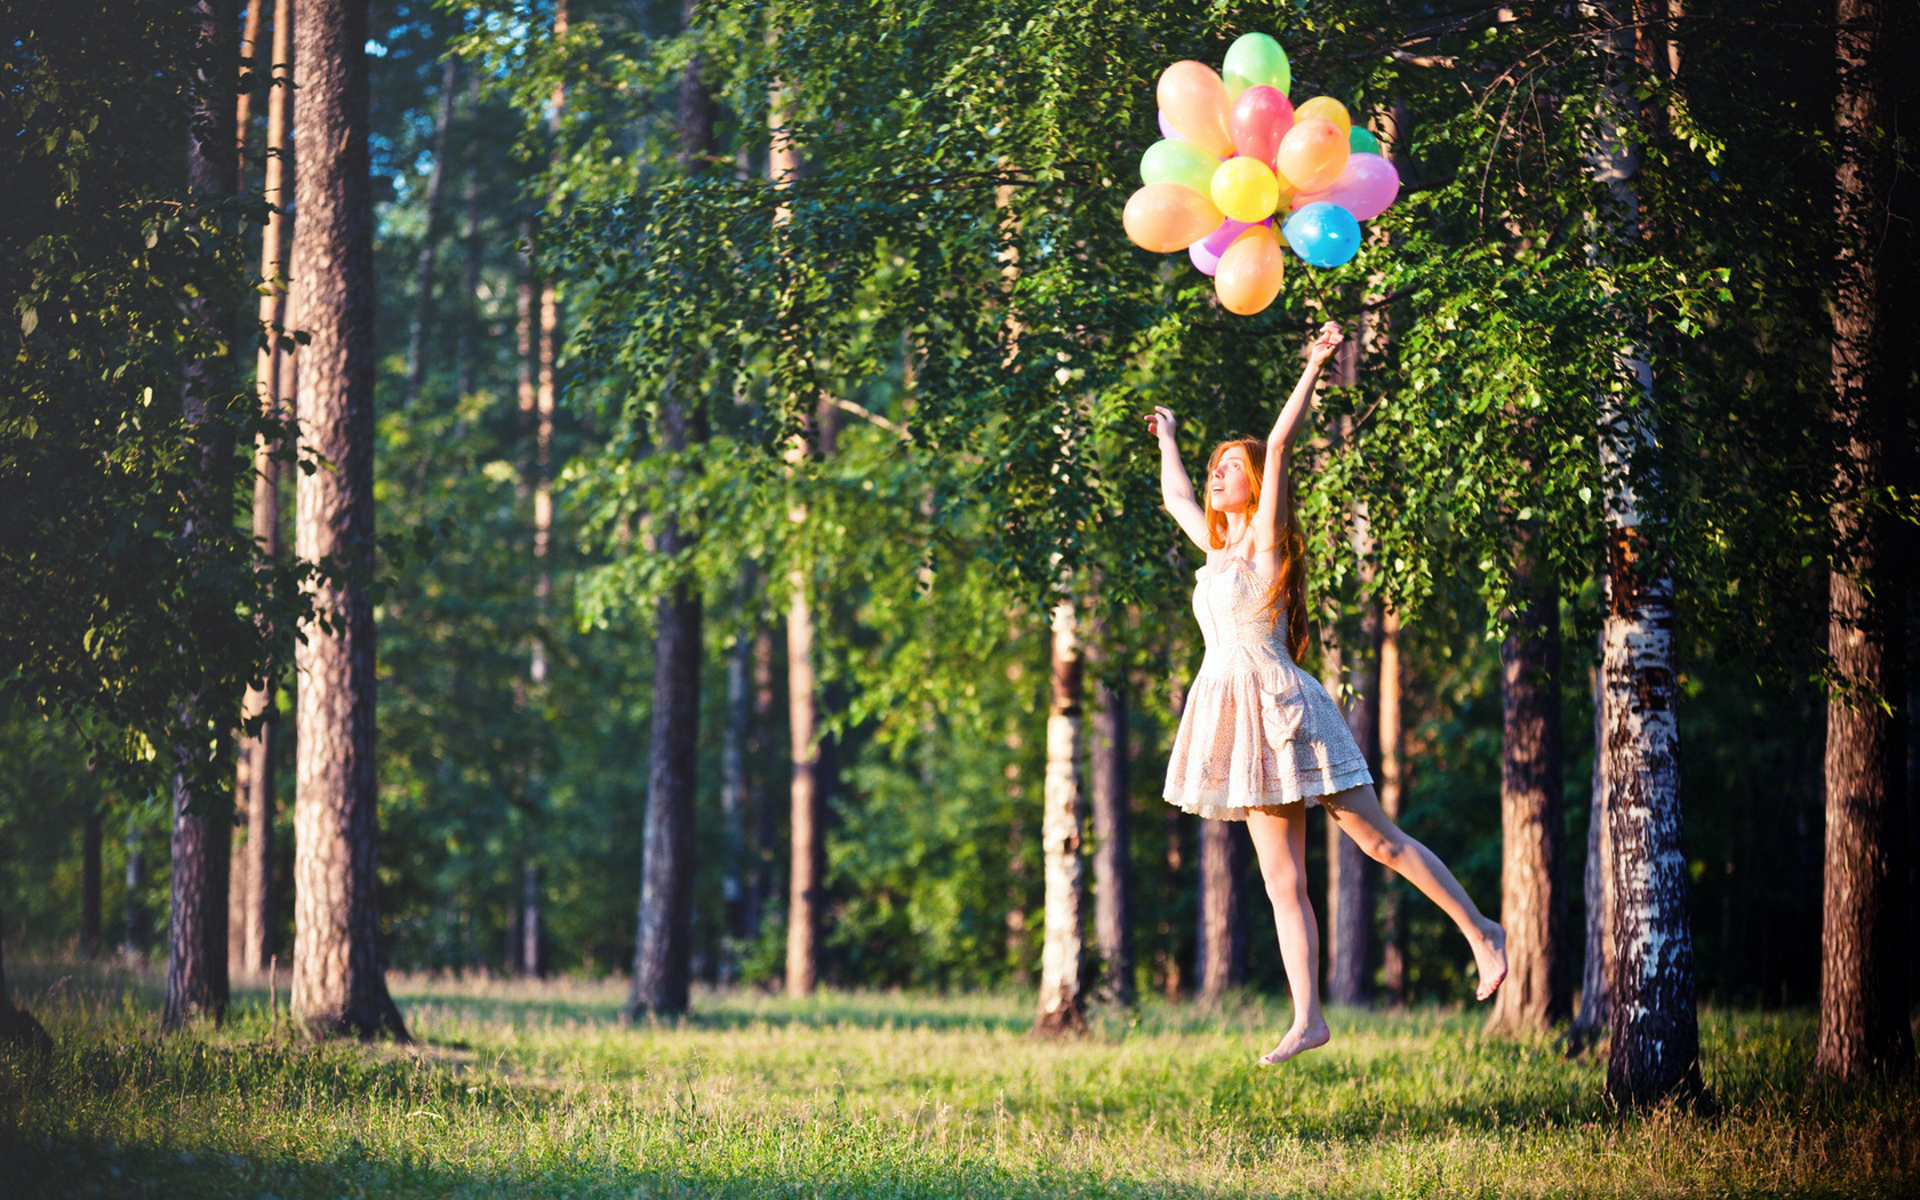 mood, Emotion, Balloon, Color, Trees, Forest, Nature, Women, Females, Girls, Babes, Model, Sensual Wallpaper